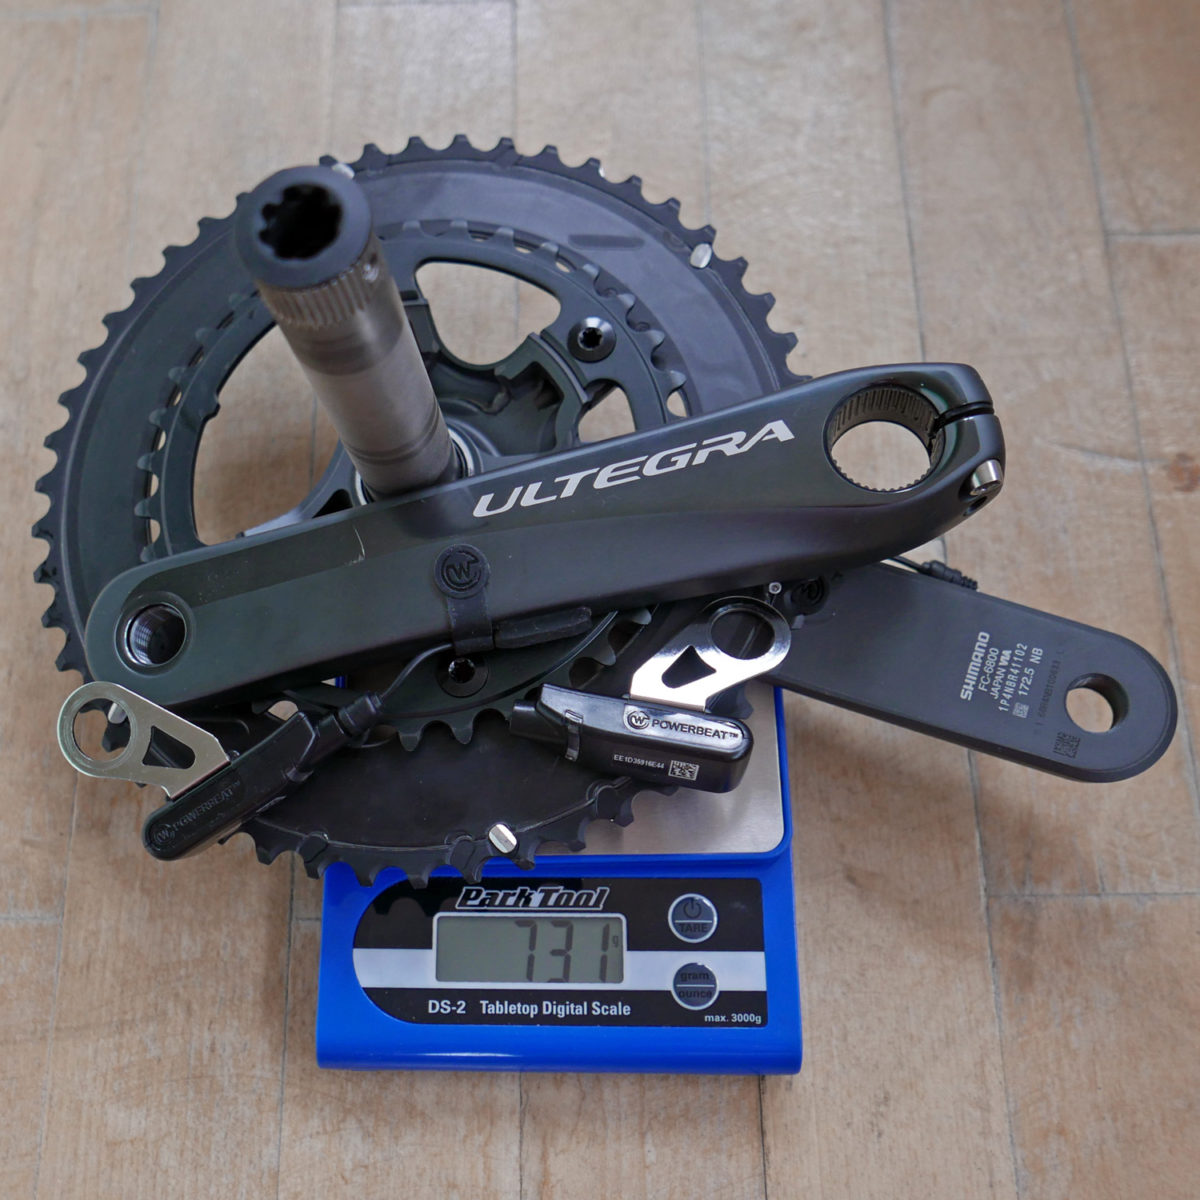 Just in: Watteam Powerbeat G2, latest DIY dual-sided power meter iteration, with actual weights